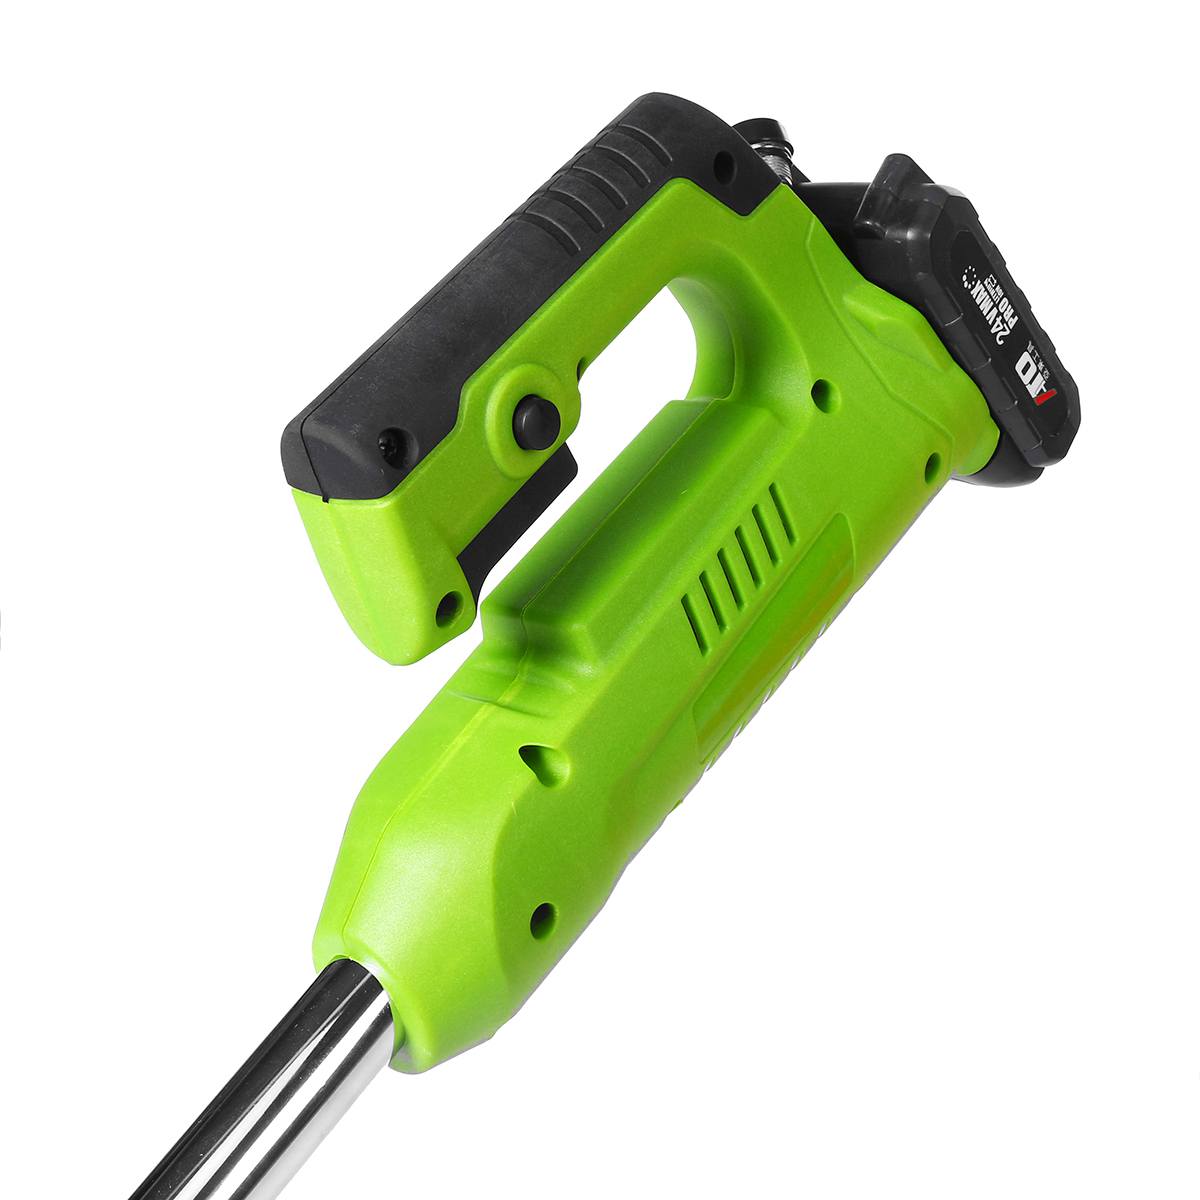 24V Electric Lawn Mower with 2PC 3000mAh Li-ion Battery Cordless Grass Trimmer Auto Release String Cutter Garden Power Tool